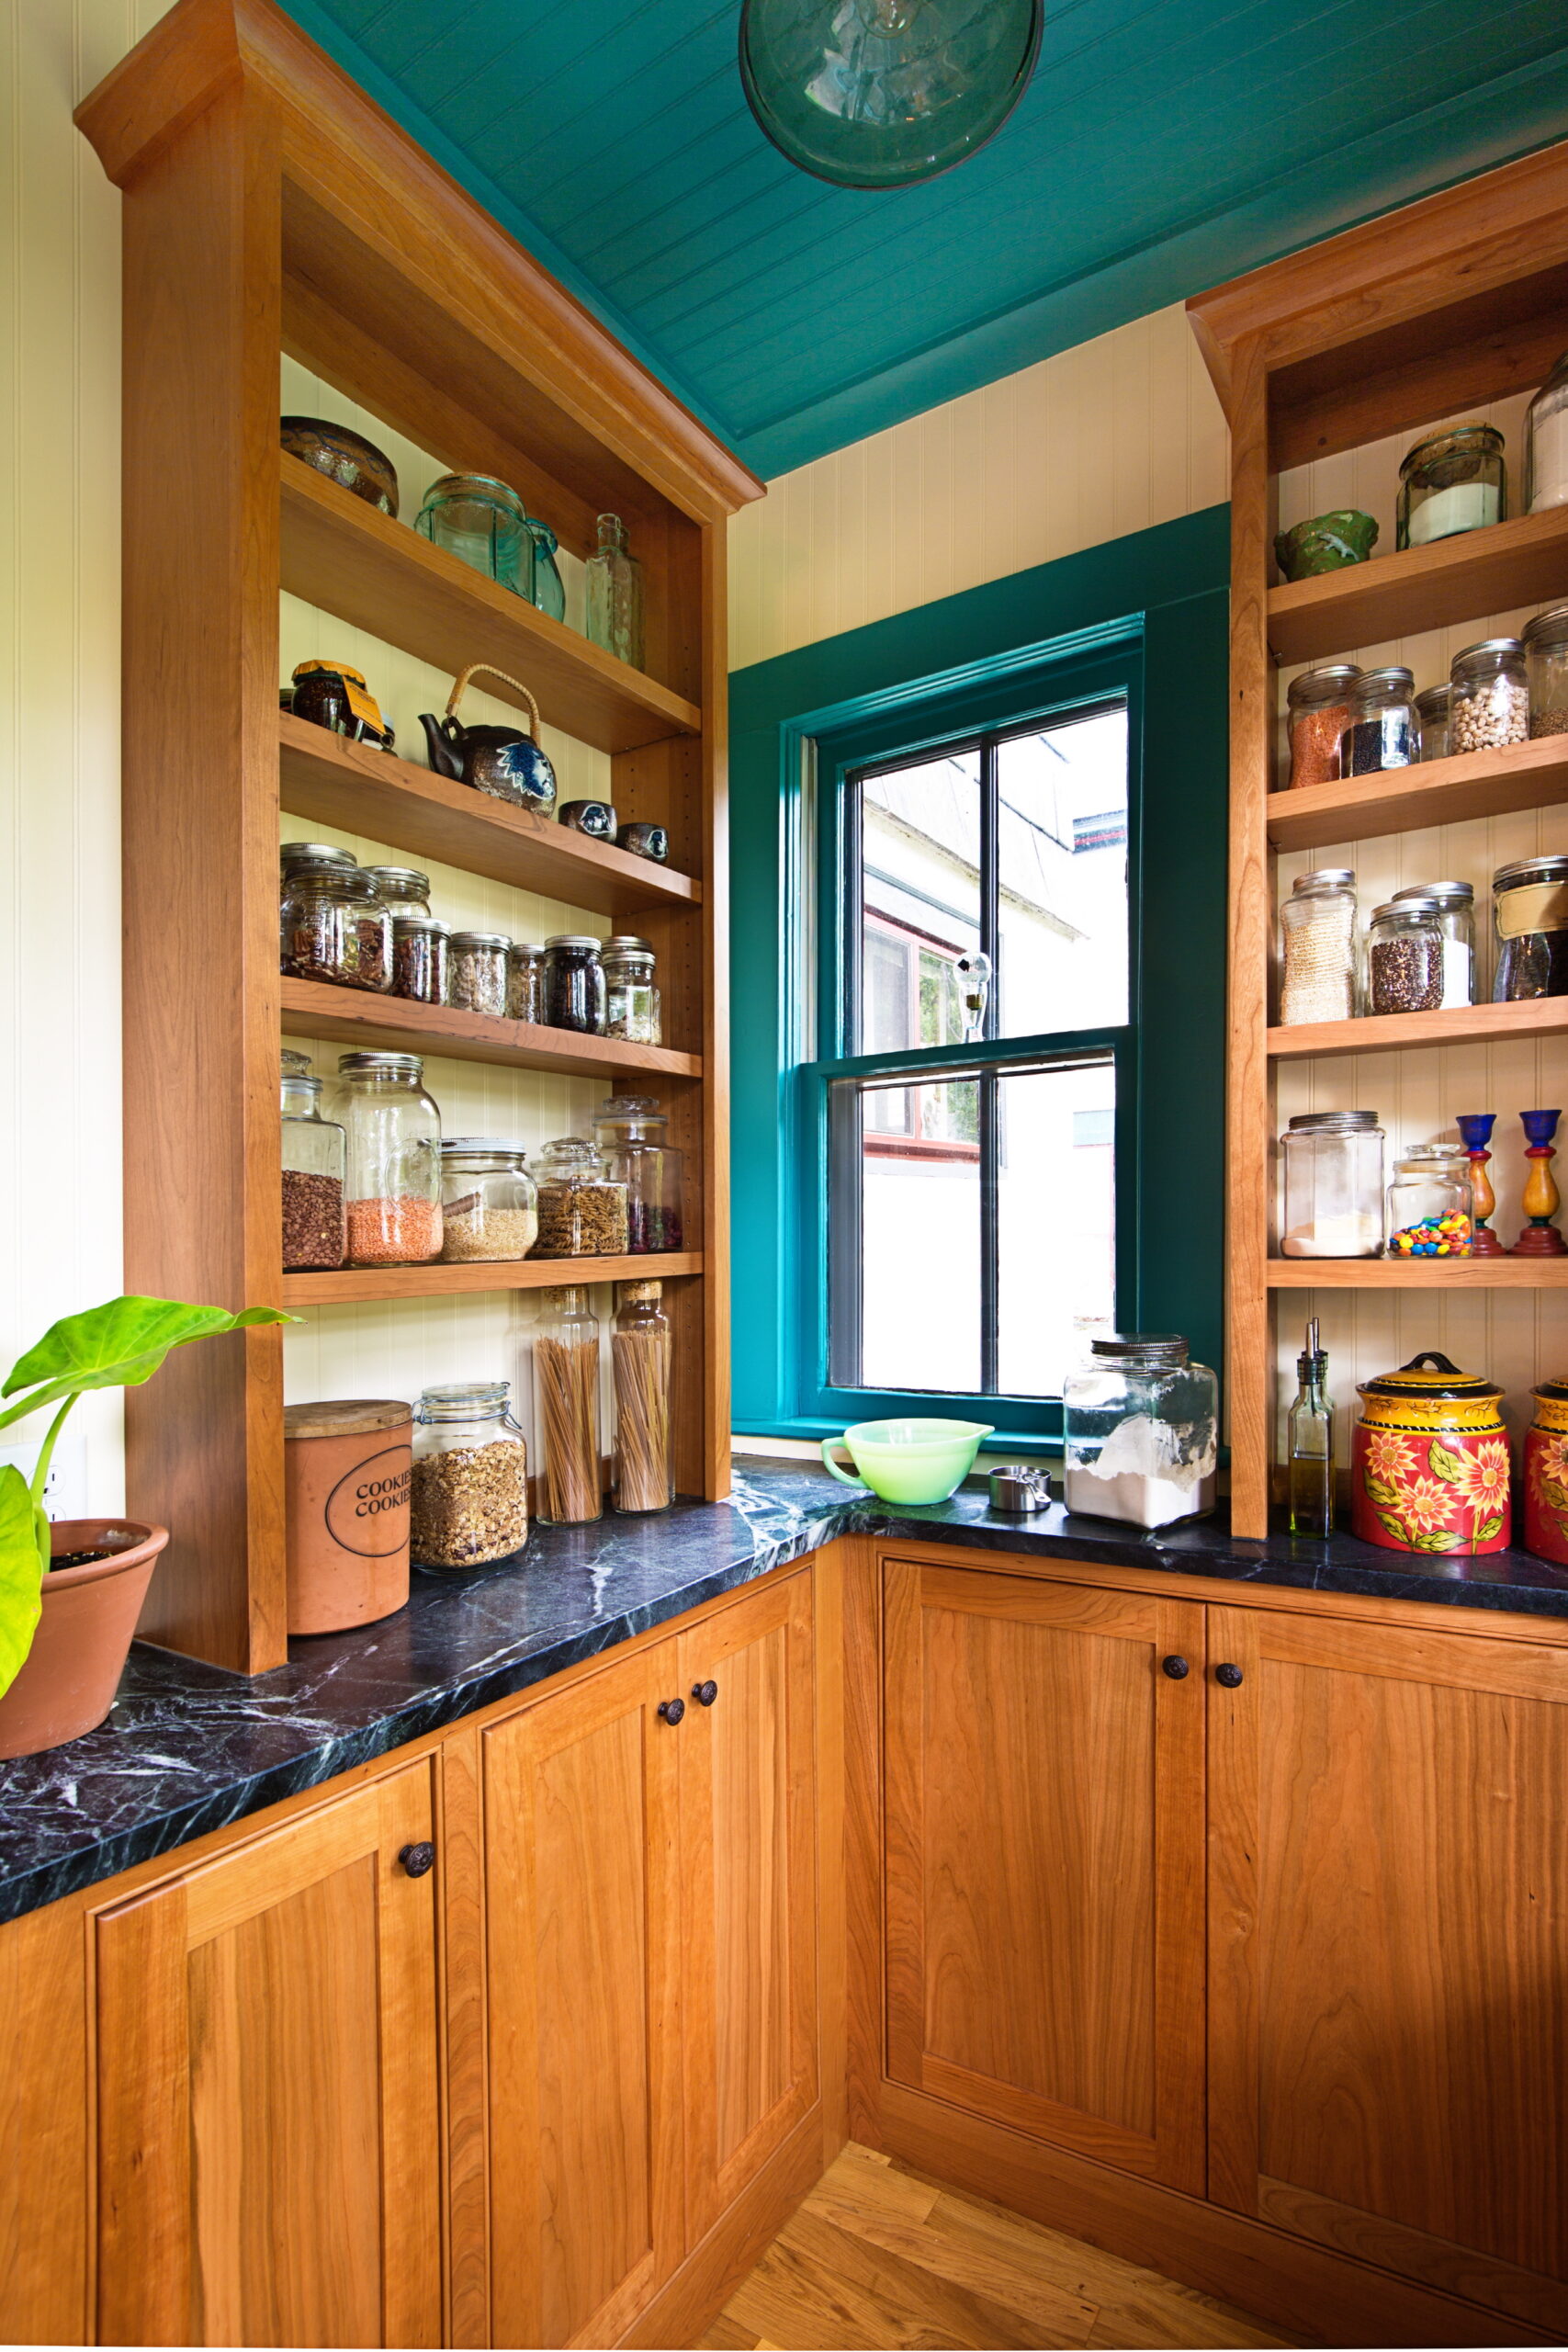 When remodeling a small kitchen, maximizing limited pantry space is essential.